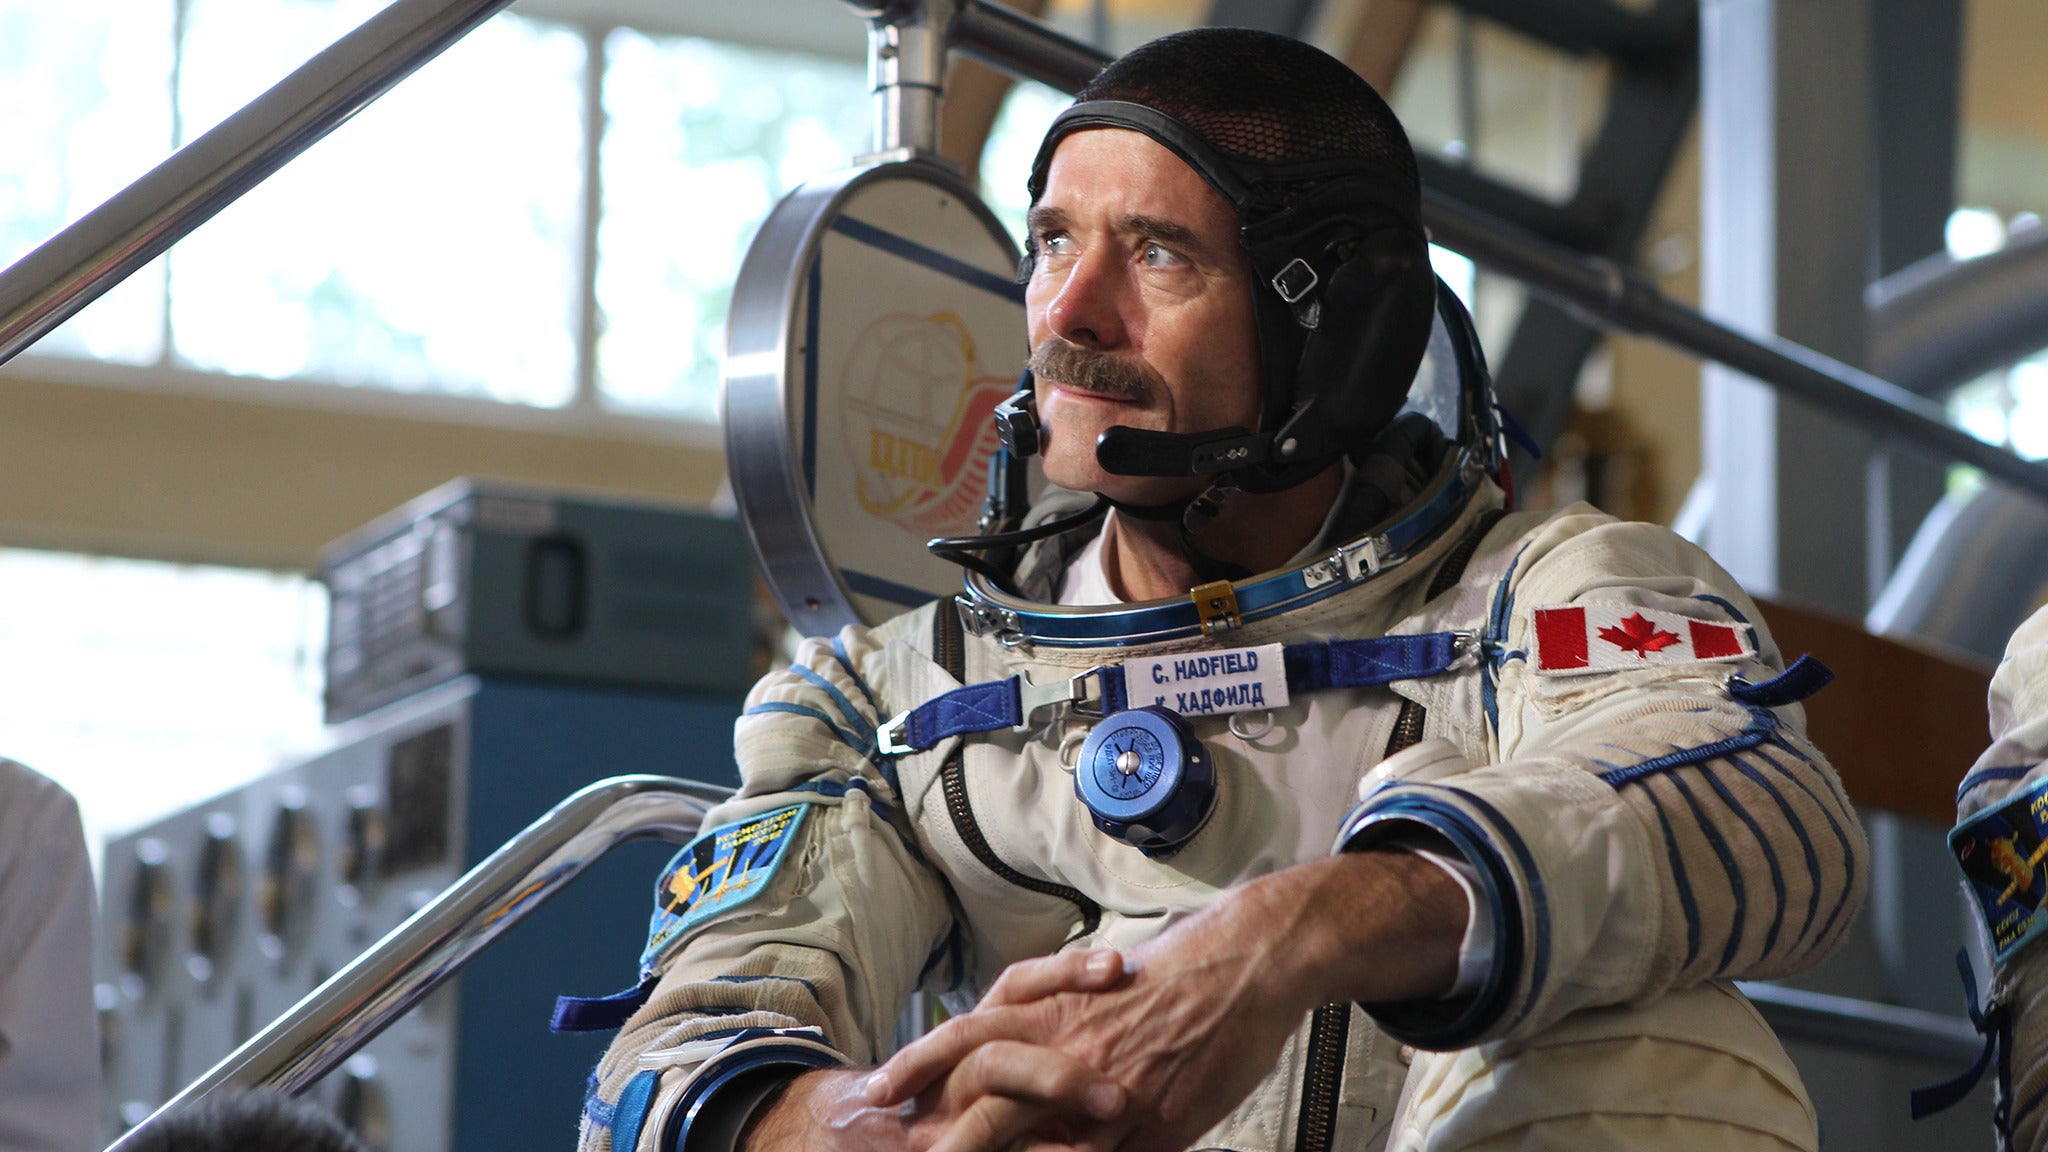 Chris Hadfield Presents Exploration: Where We're Going Next in Hamilton promo photo for Live Nation presale offer code